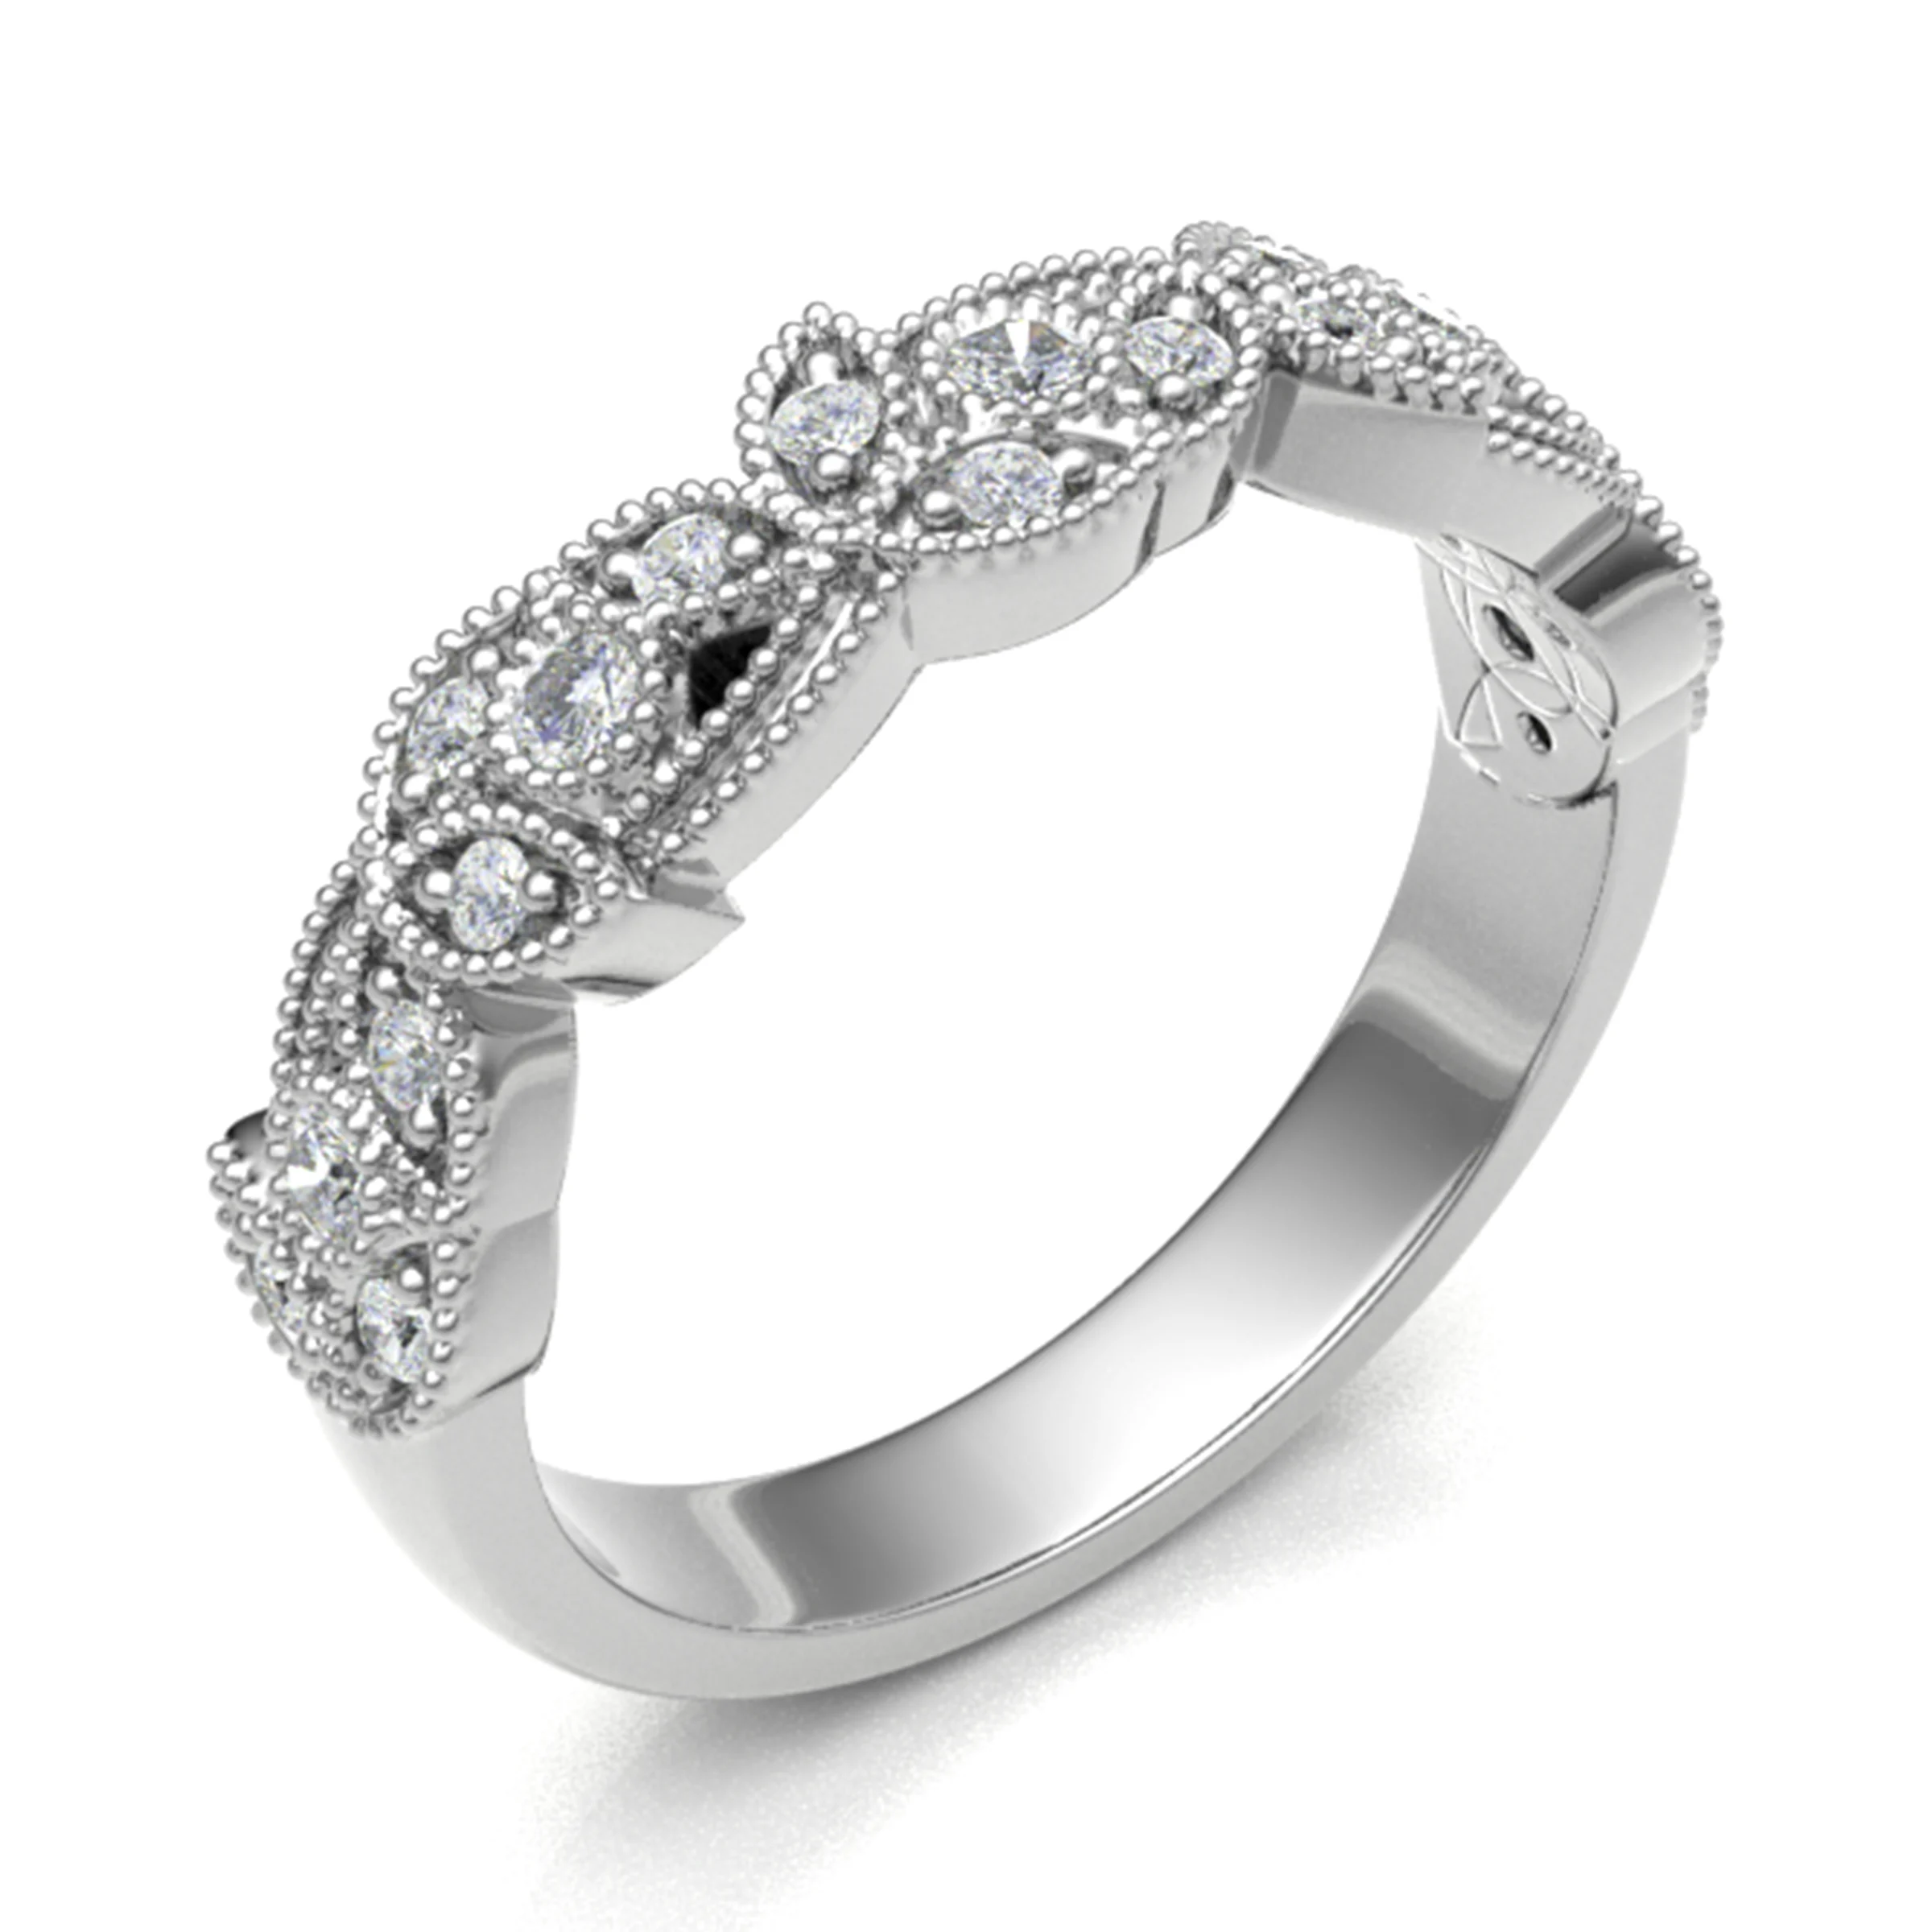 0.20 Carat Grain and Rubover Set Round Diamond Floral Vintage Half Eternity Ring